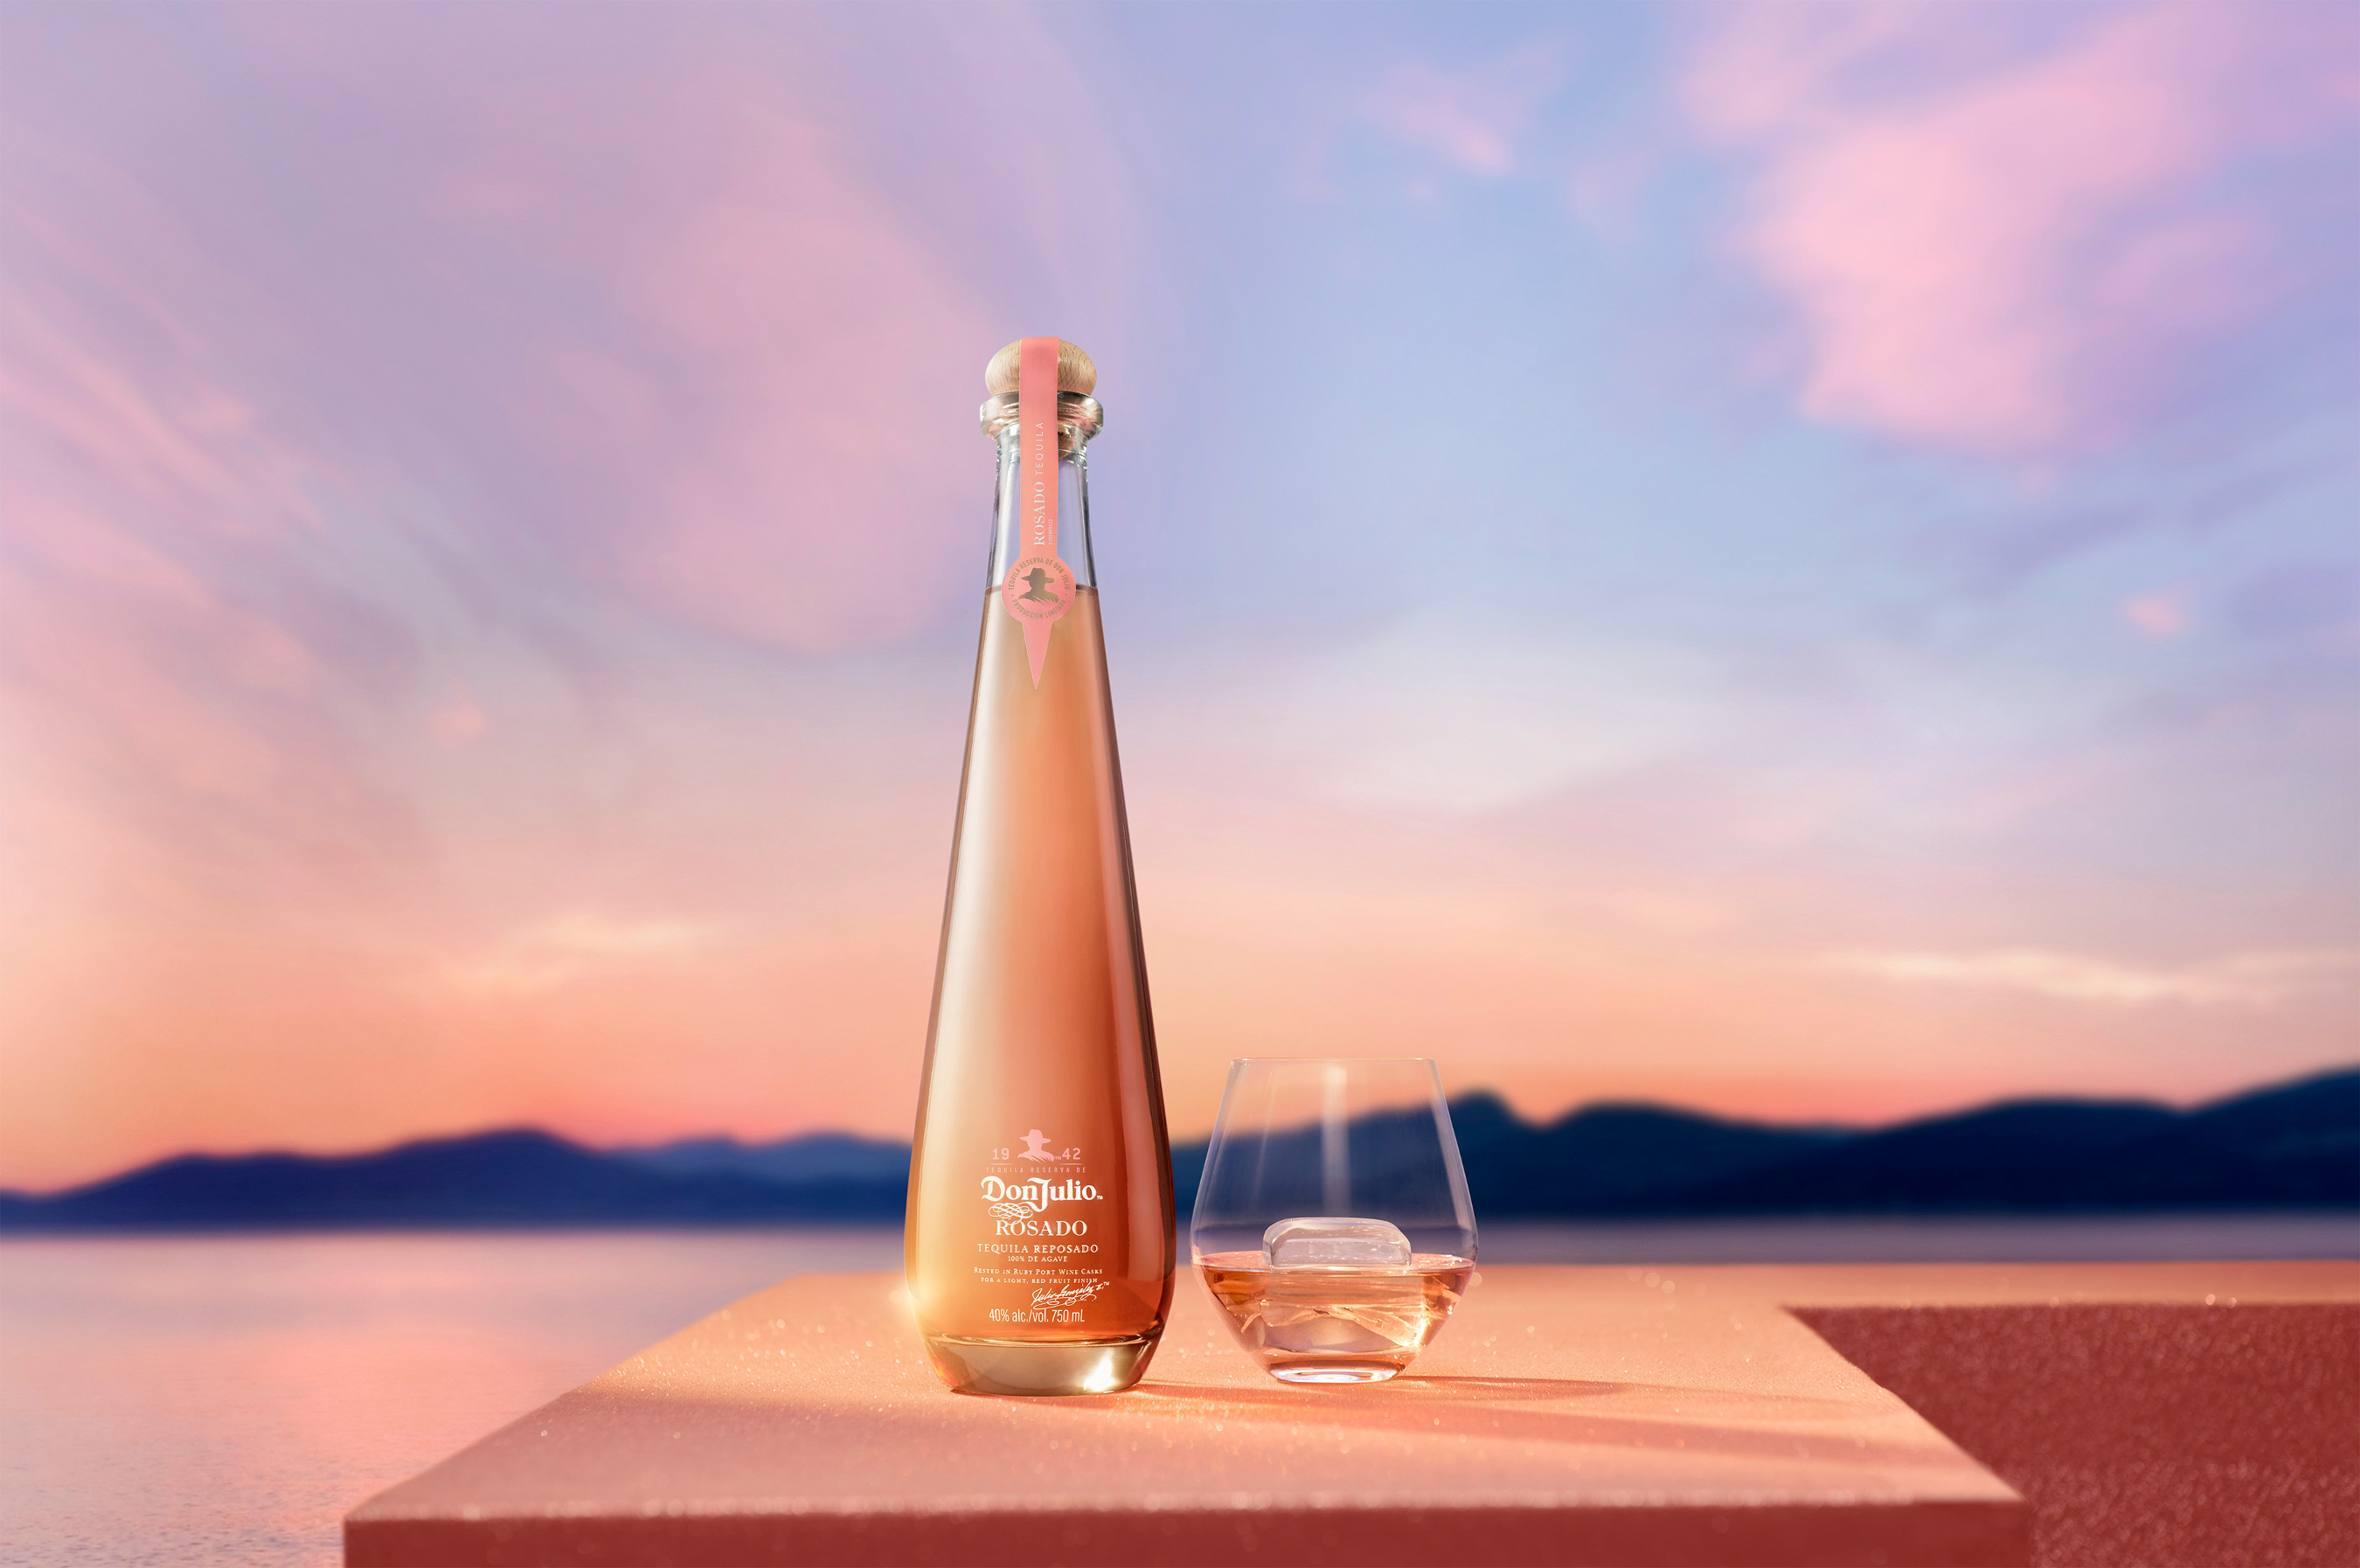 Whether sipping poolside with friends or celebrating at a beach club, Tequila Don Julio Rosado is the perfect spirit to enjoy for all of life’s fabulous moments